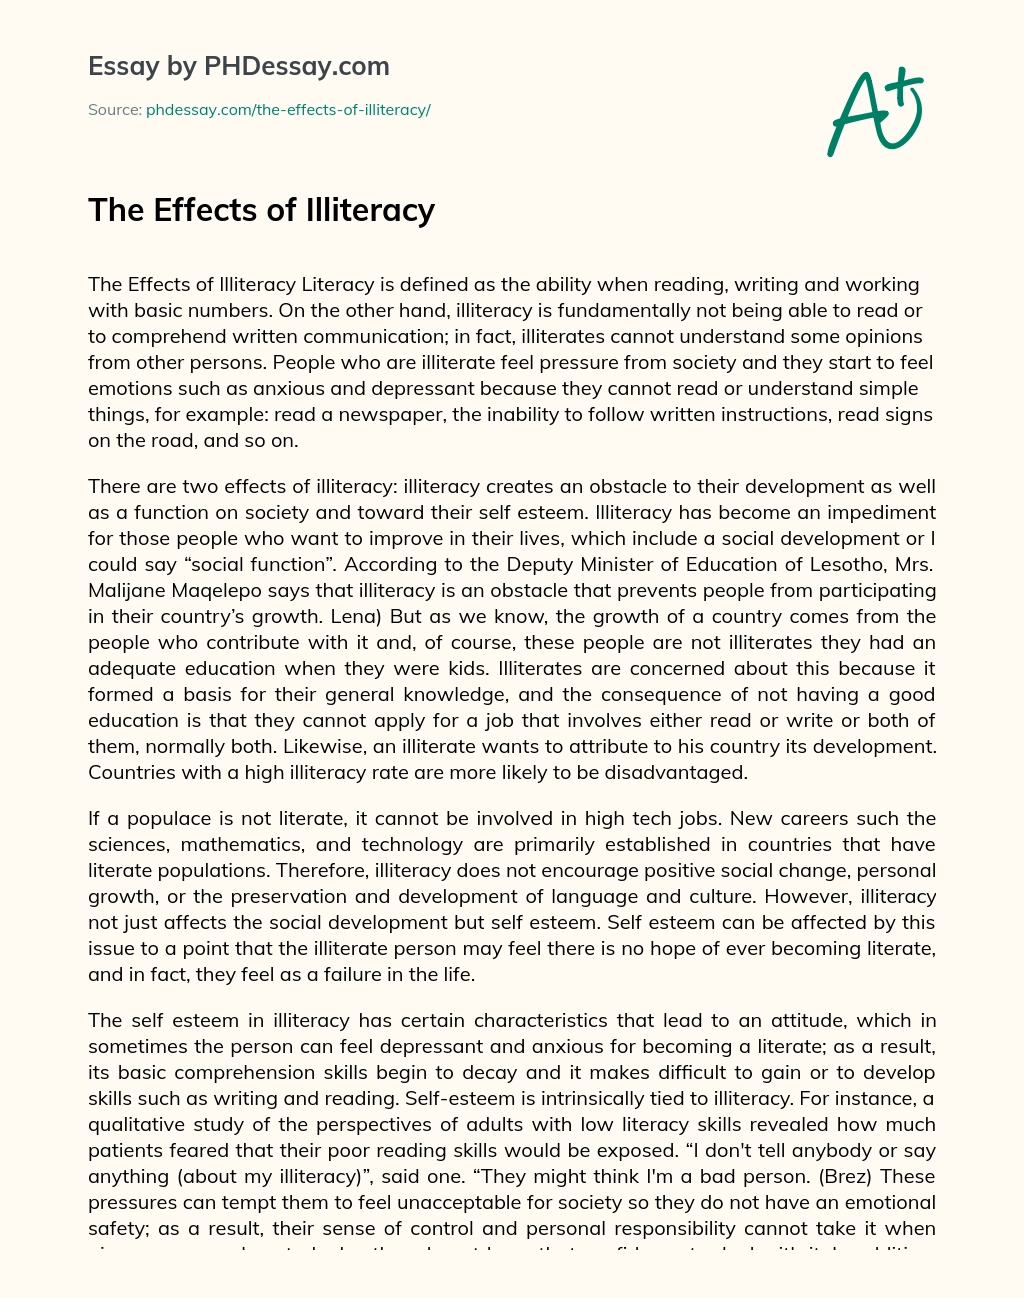 The Effects of Illiteracy essay